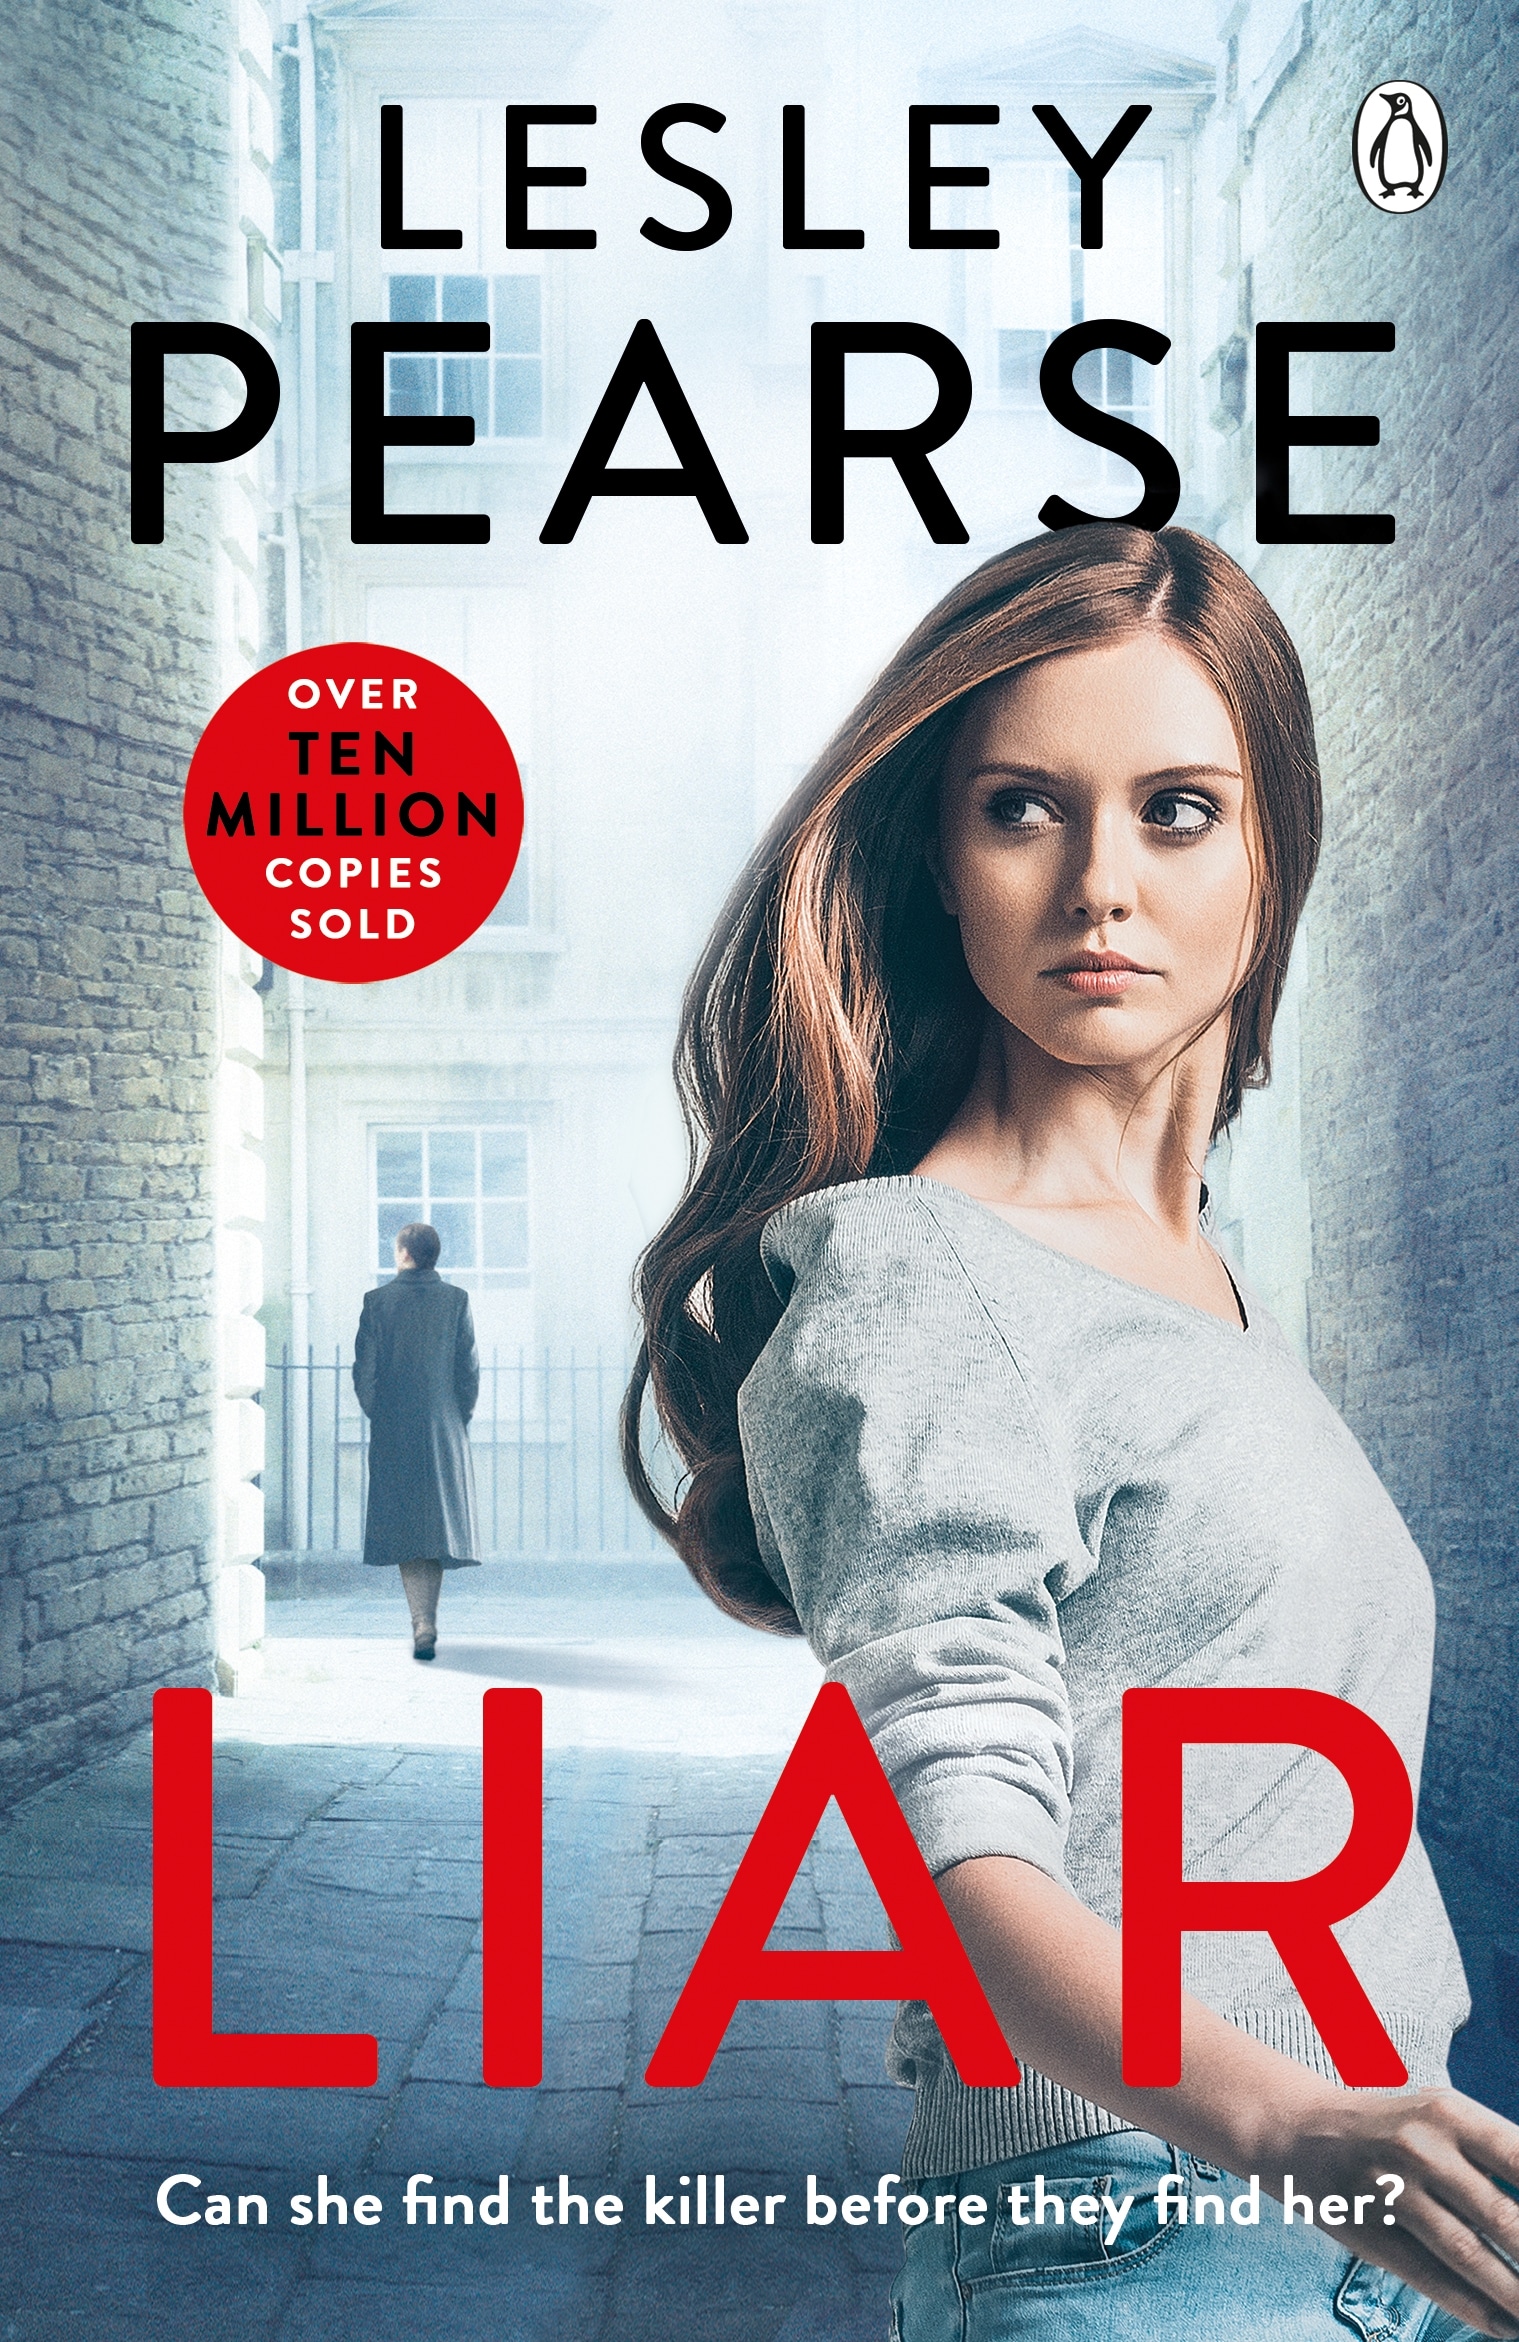 Book “Liar” by Lesley Pearse — March 4, 2021